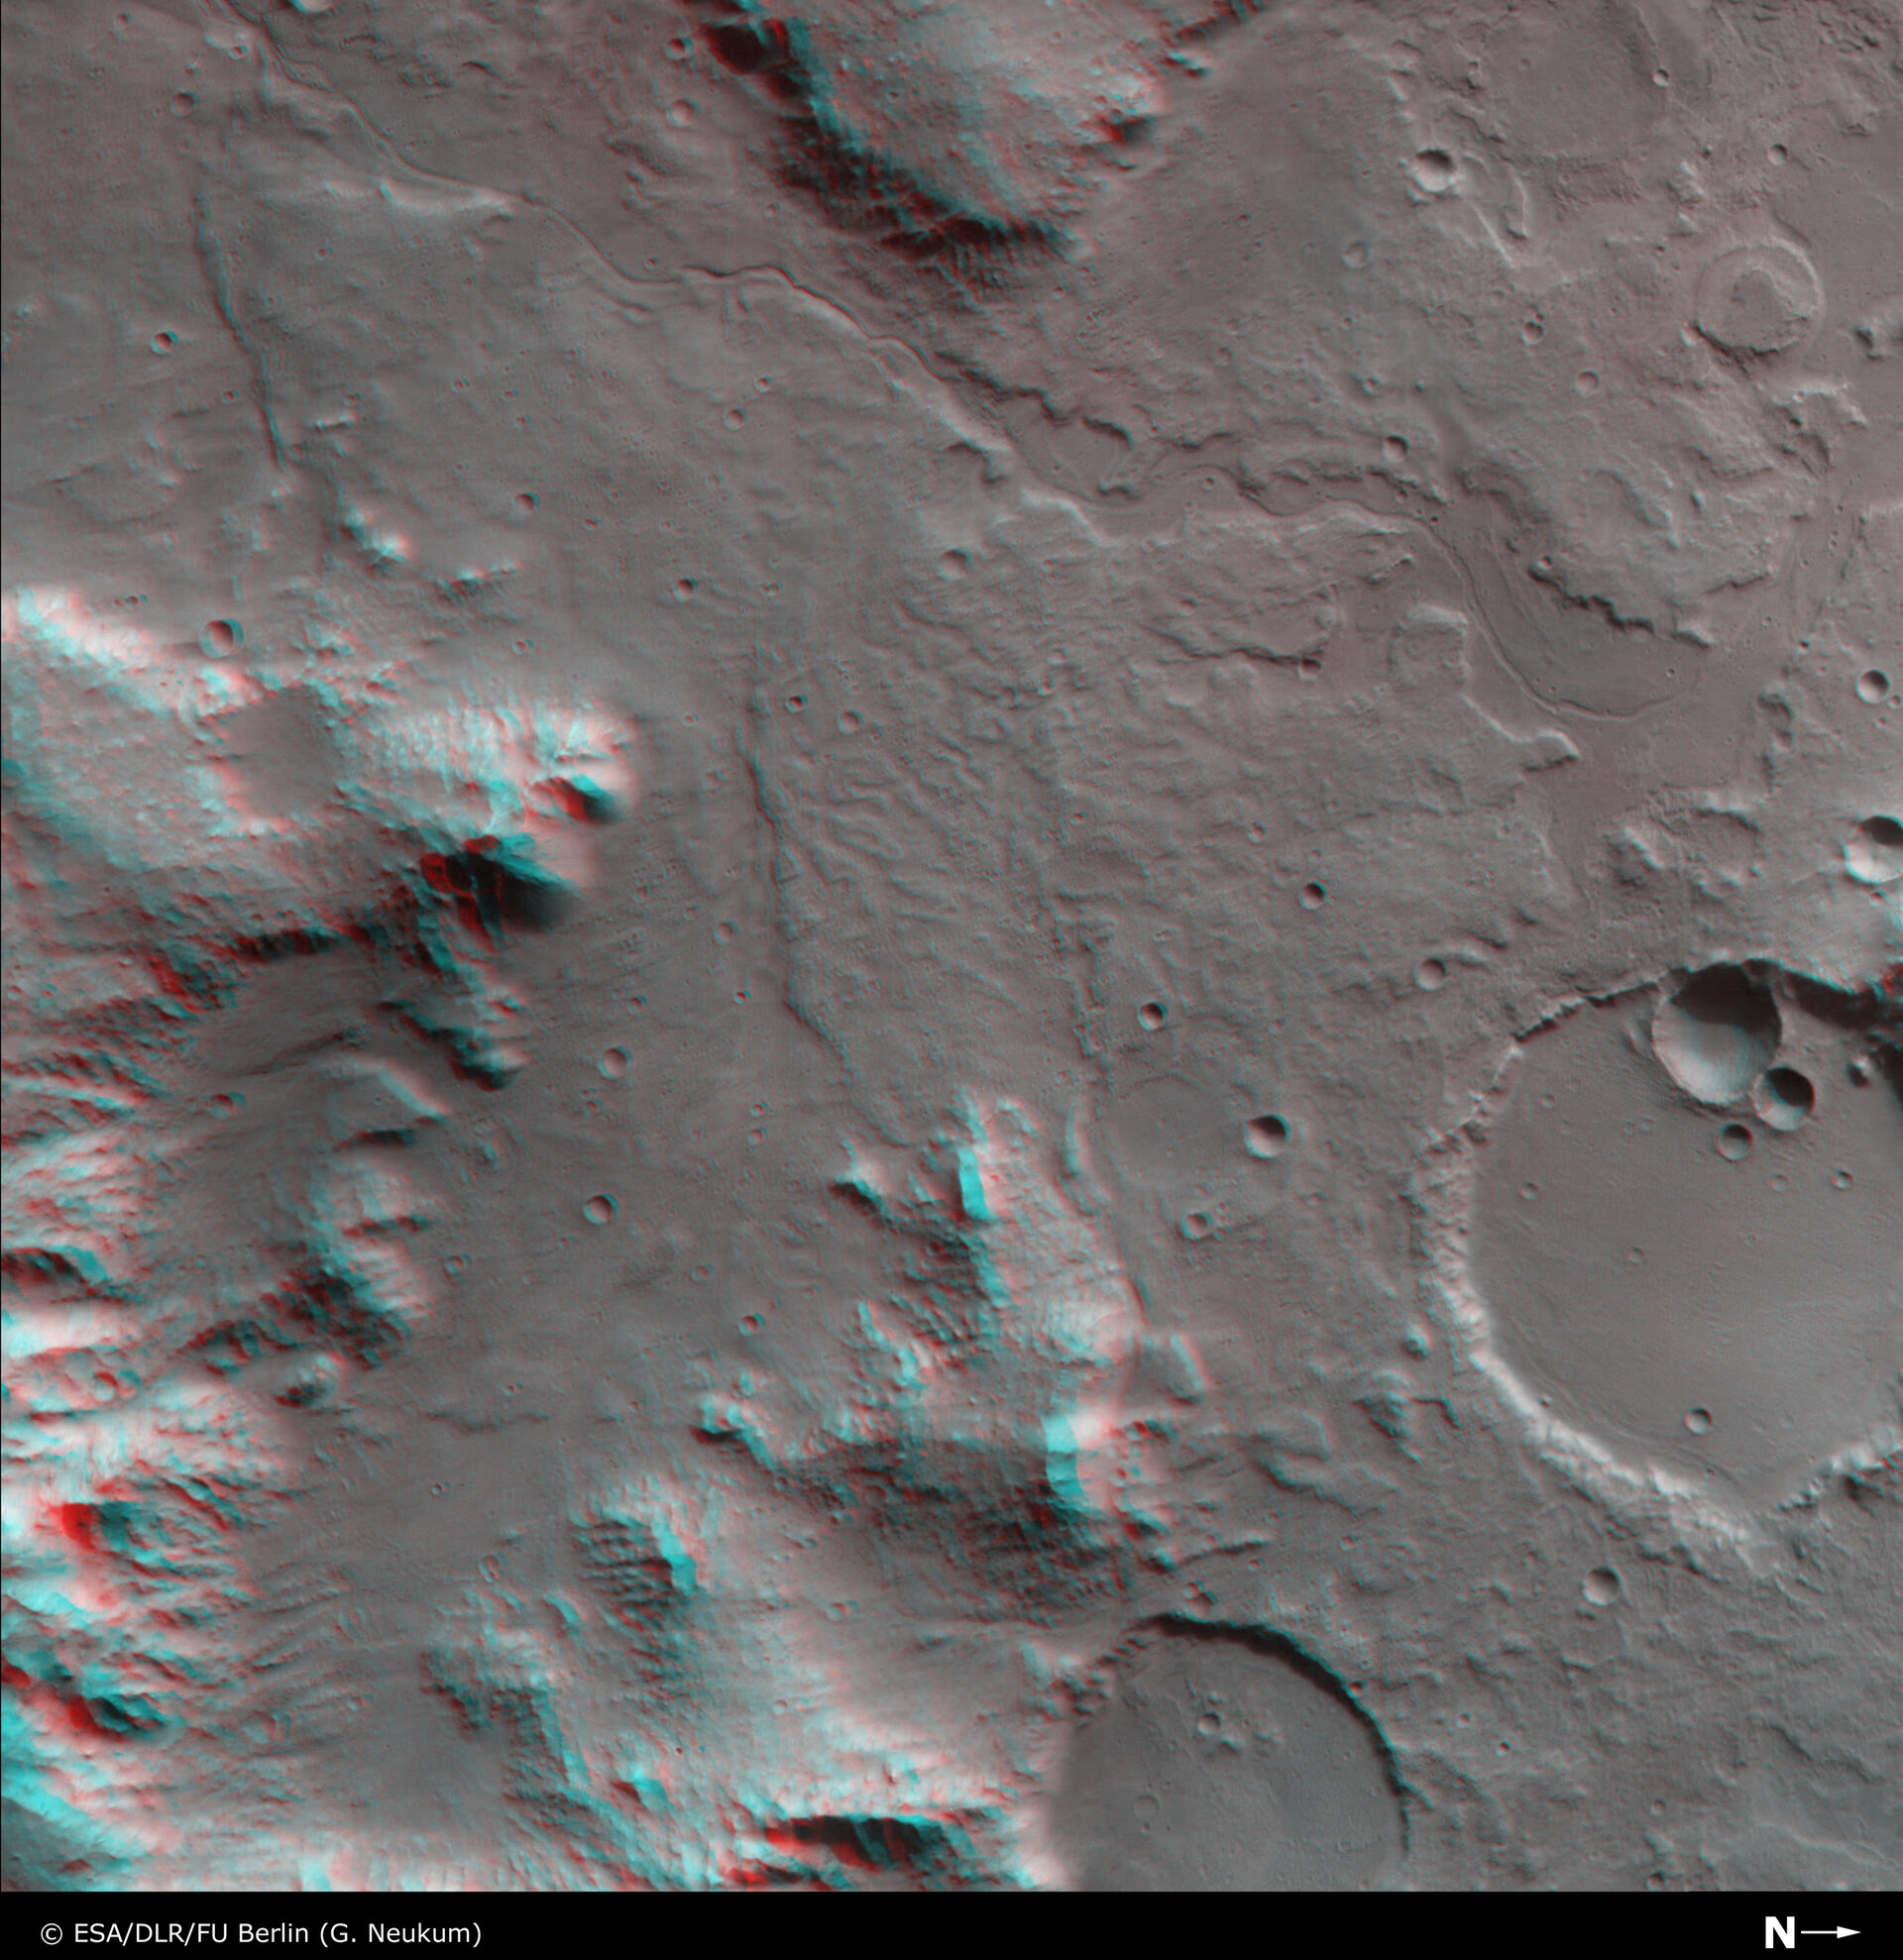 3D anaglyph view of Libya Montes valley region